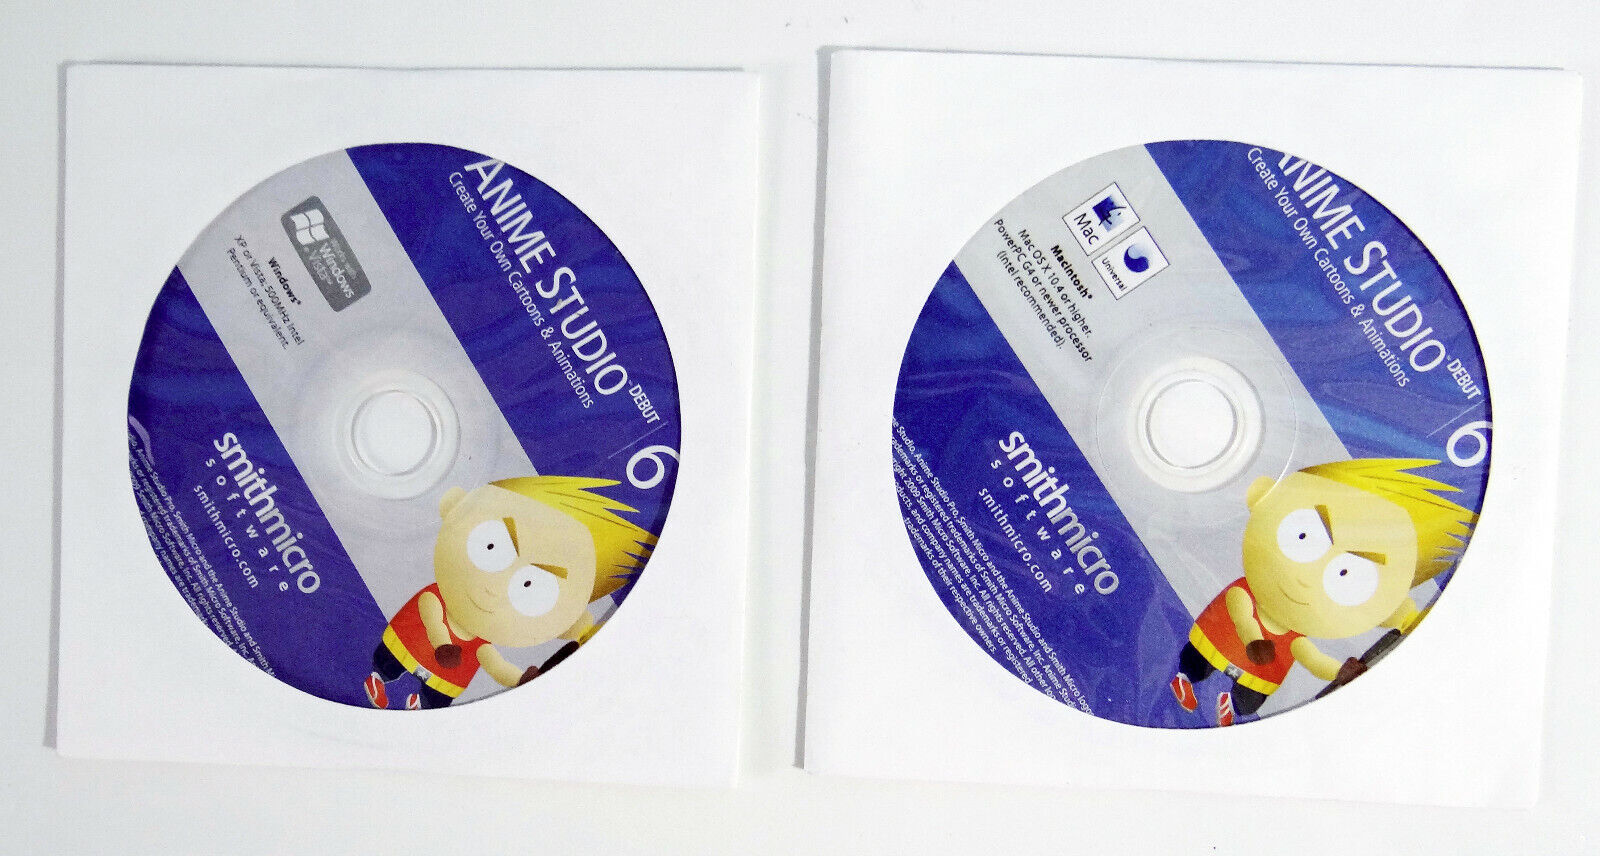 Smith Micro Anime Studio Debut 6 for PC & Mac 2 CDROM W/Serial Disks Only 